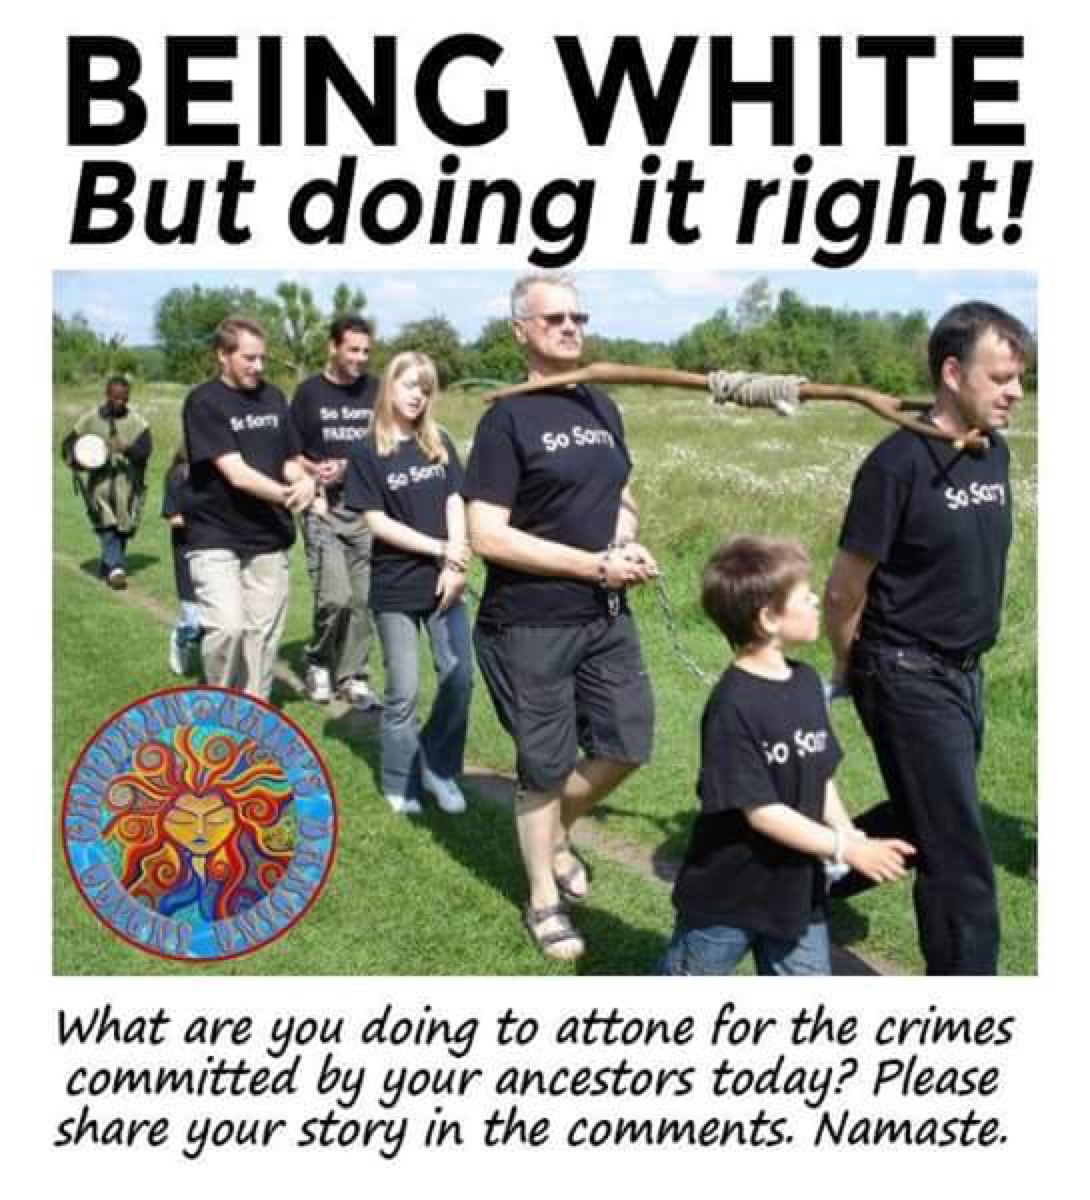 being white but doing it right - Being White But doing it right! Son Tud so som sosom to so What are you doing to attone for the crimes committed by your ancestors today? Please your story in the . Namaste.